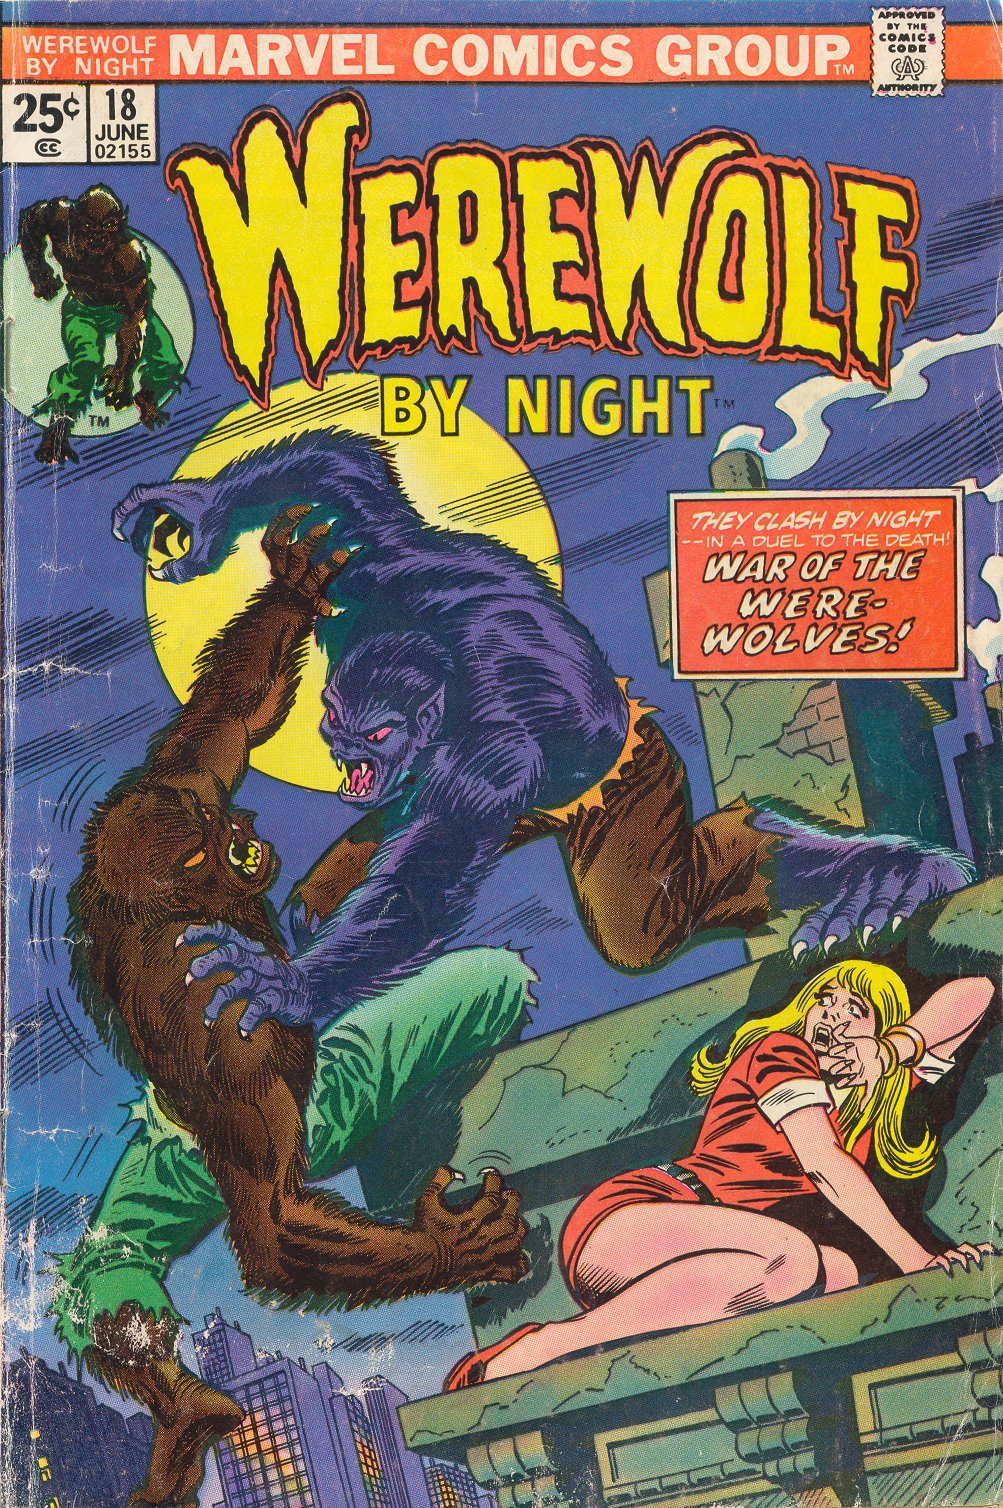 Werewolf by Night (1972) #36, Comic Issues